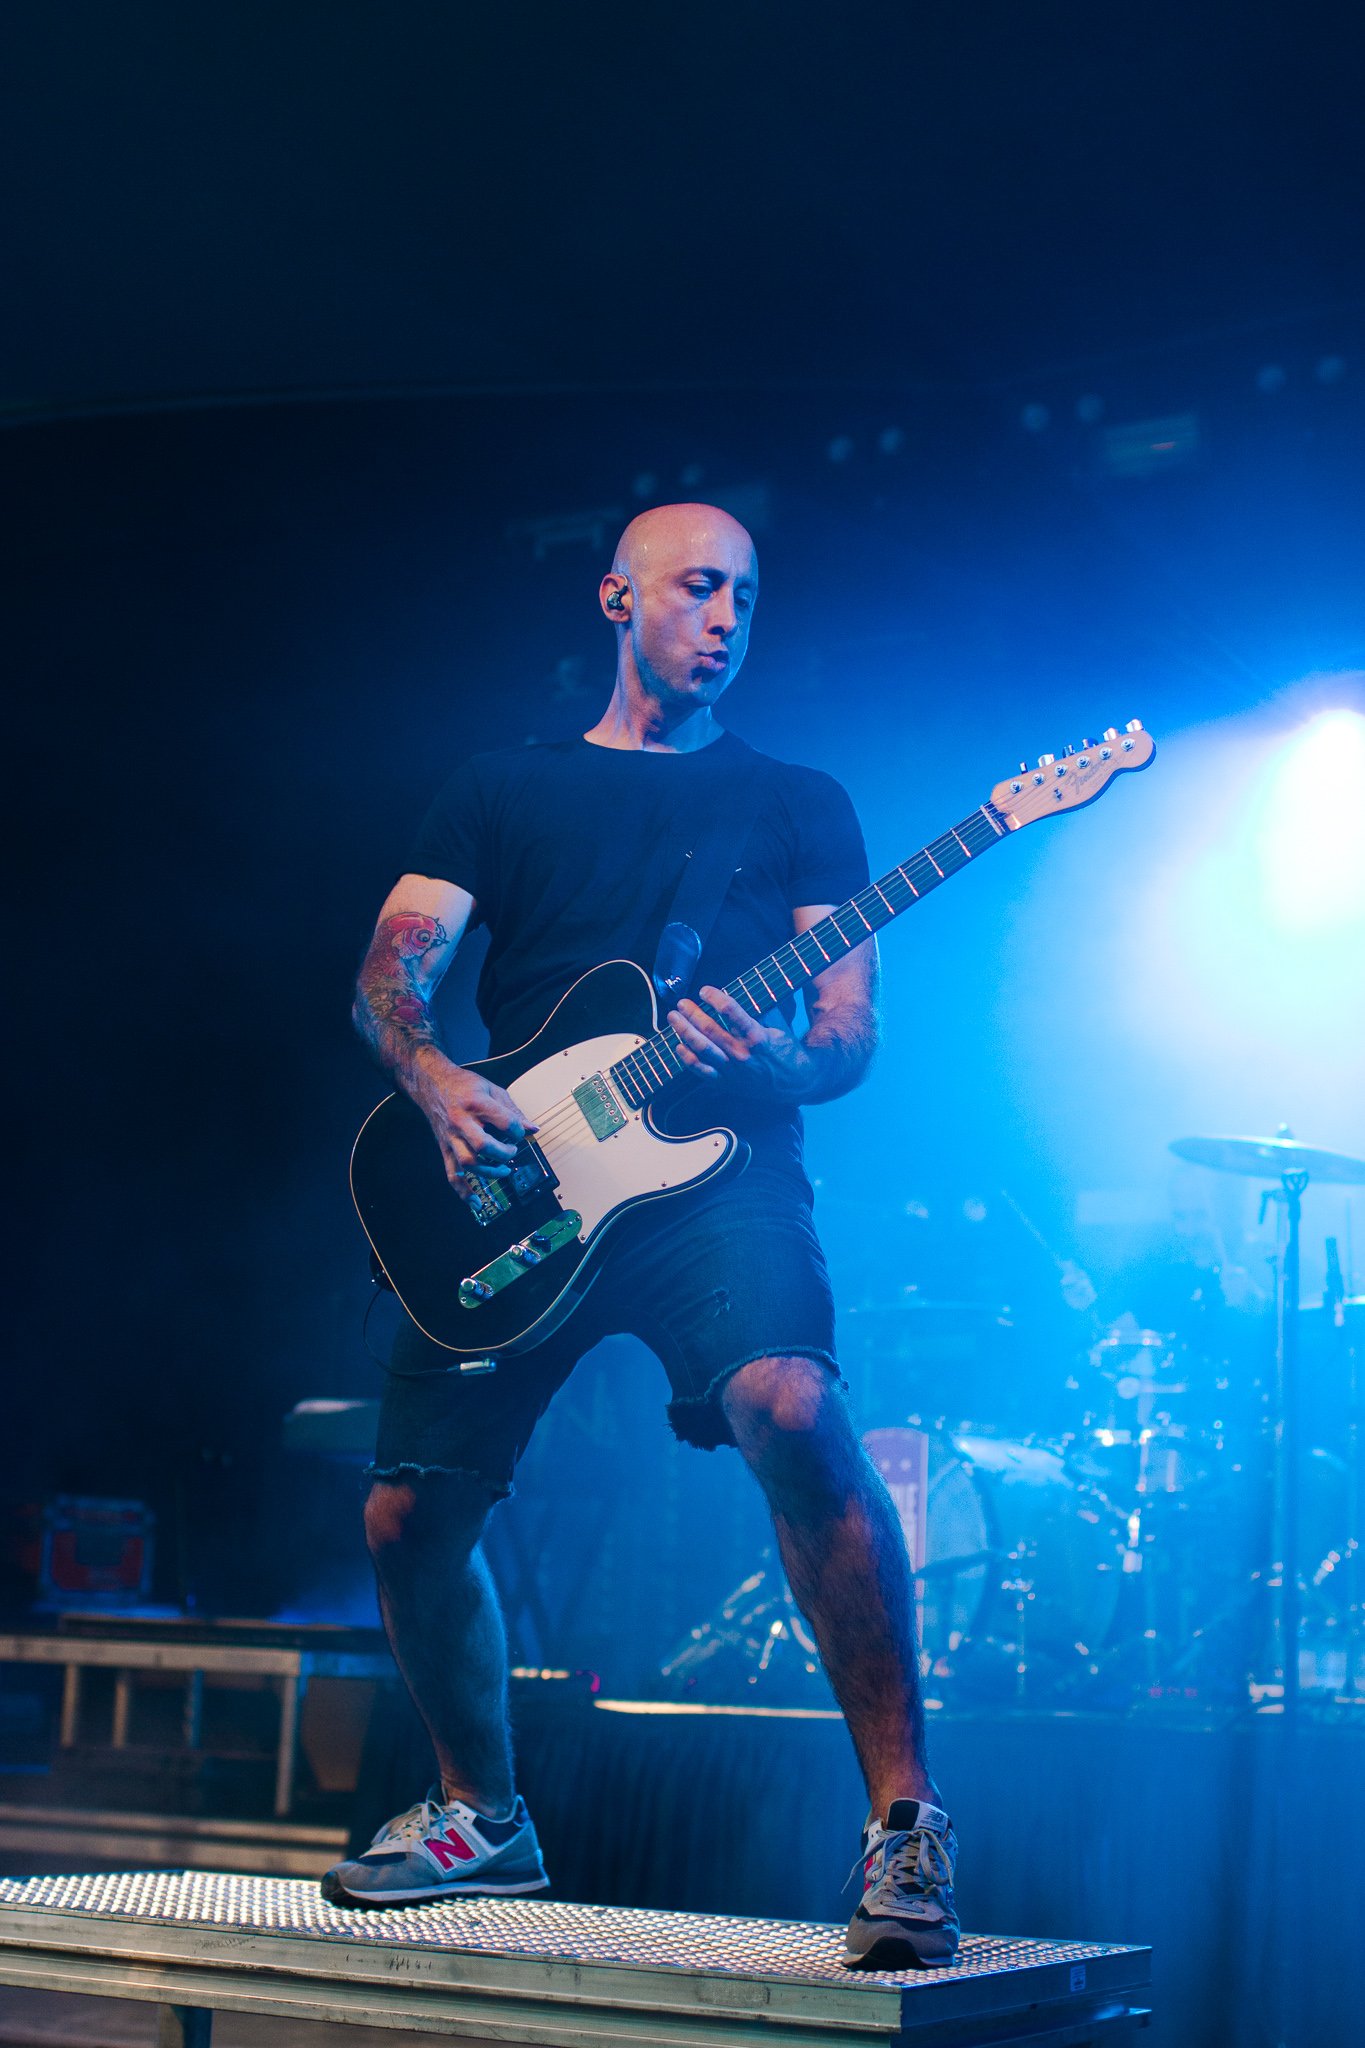  Lead guitarist Jeff Stinco of Simple Plan shows off his skills during “Shut Up!” 